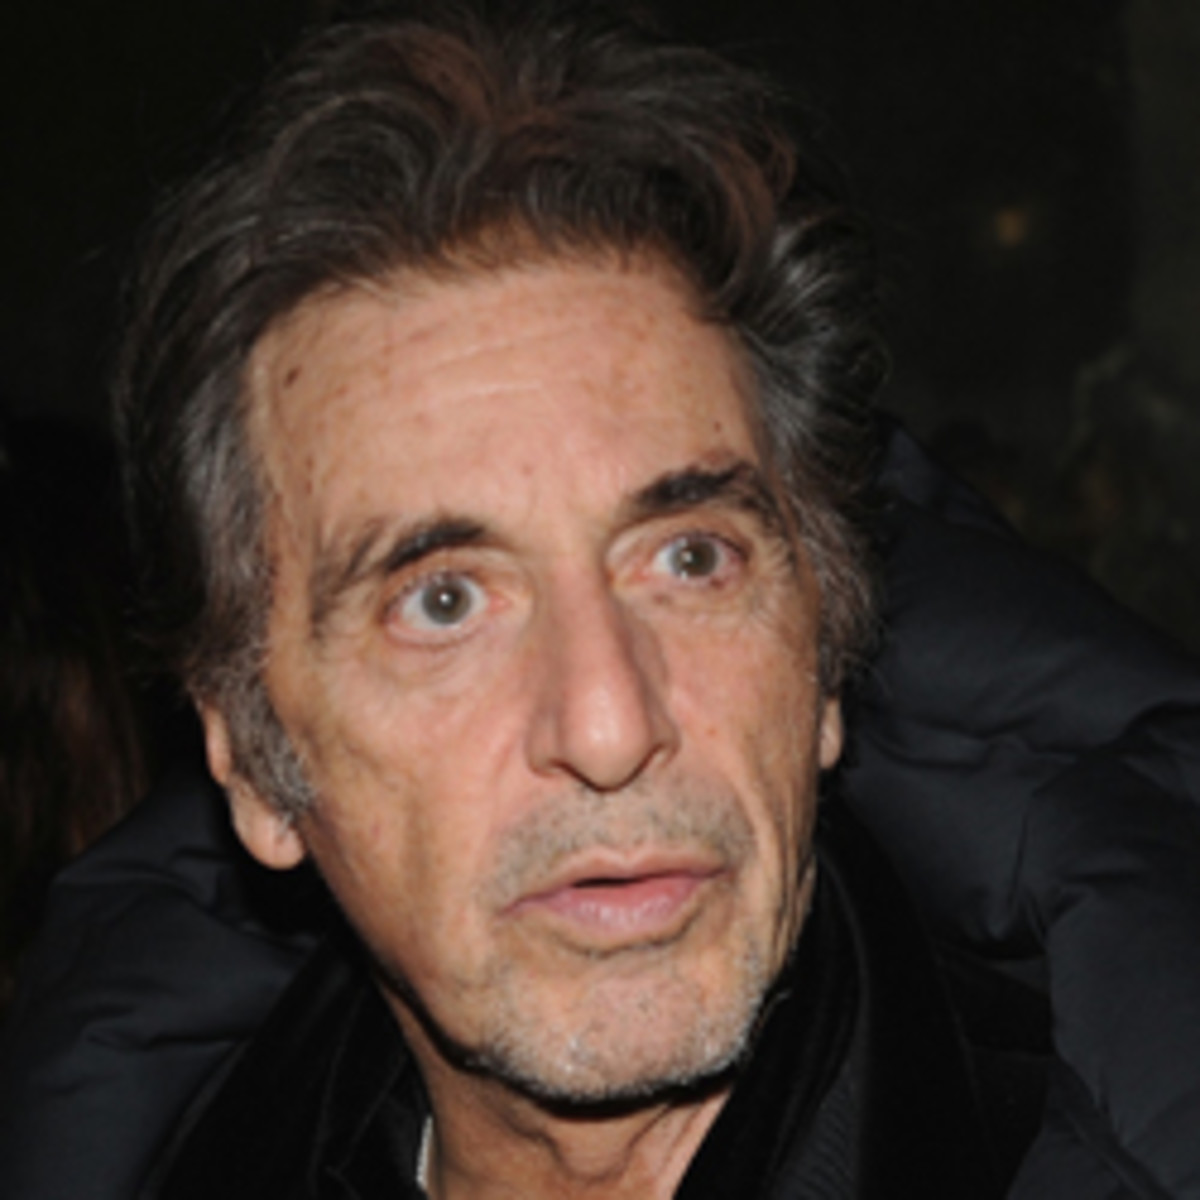 Al Pacino also played a football coach in "Any Given Sunday."(Fernando Leon/Getty Images)